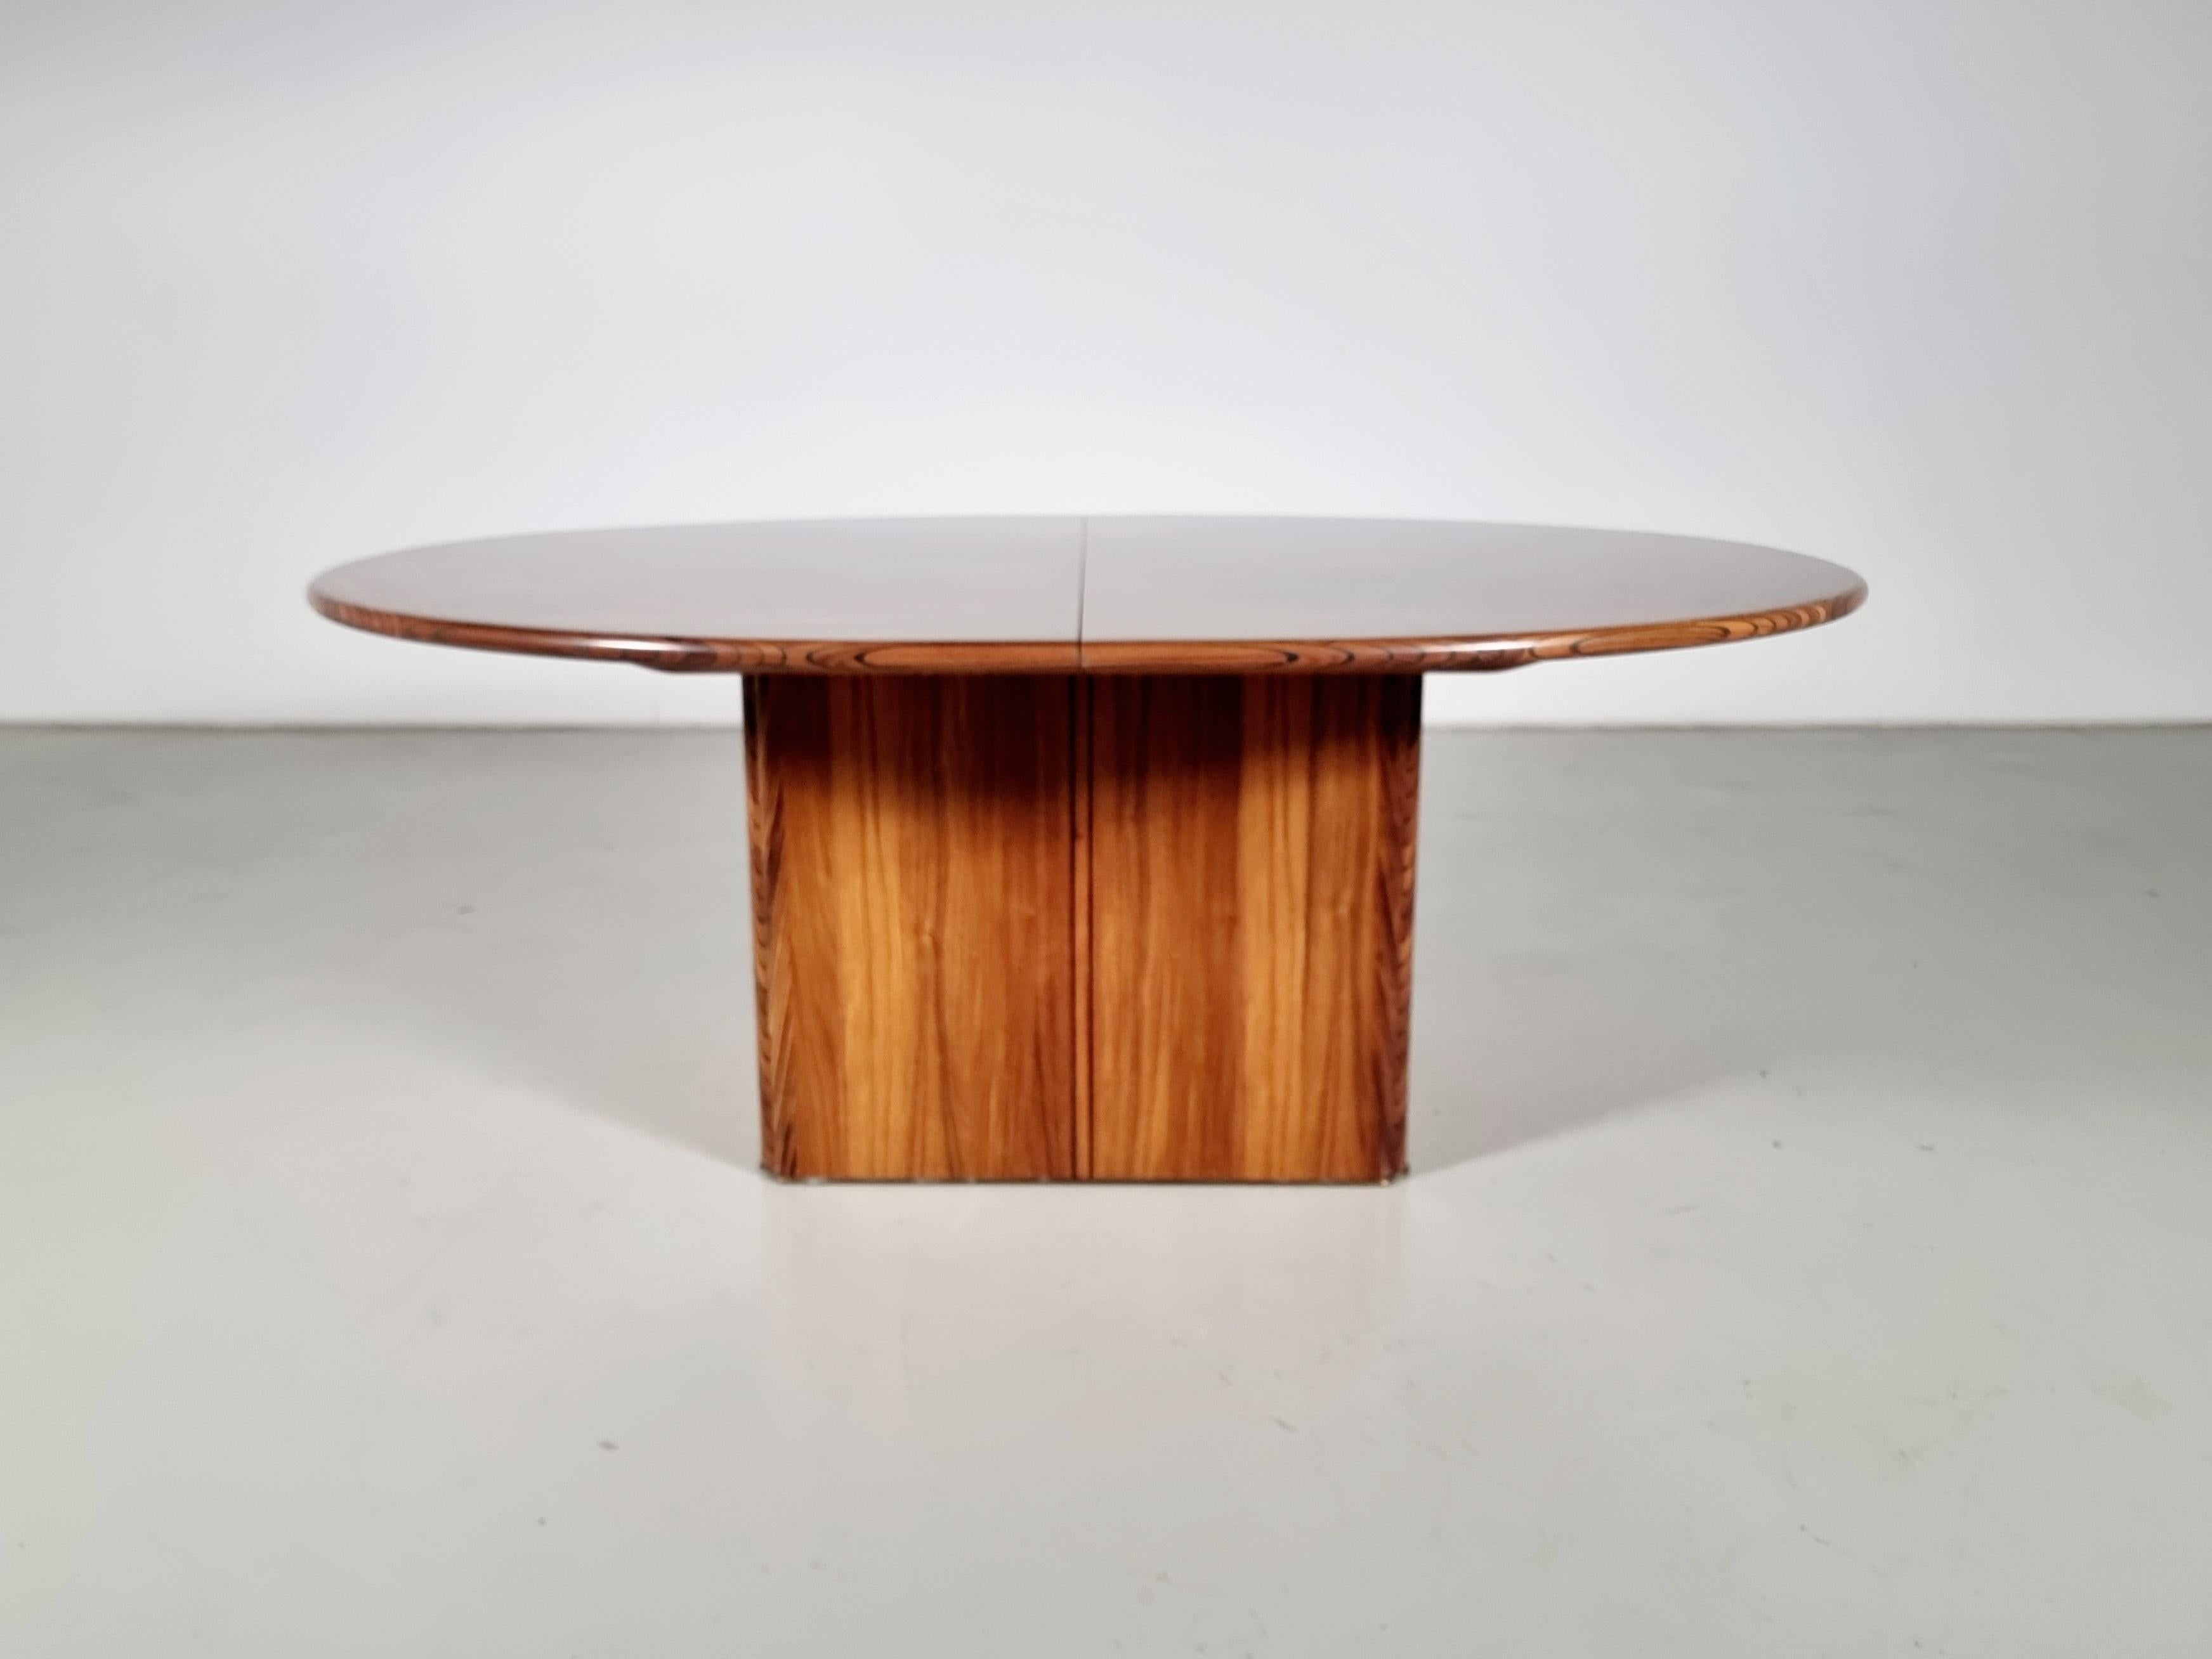 Artona 'Africa' dining set by Tobia Scarpa in walnut wood and leather, Maxalto For Sale 2